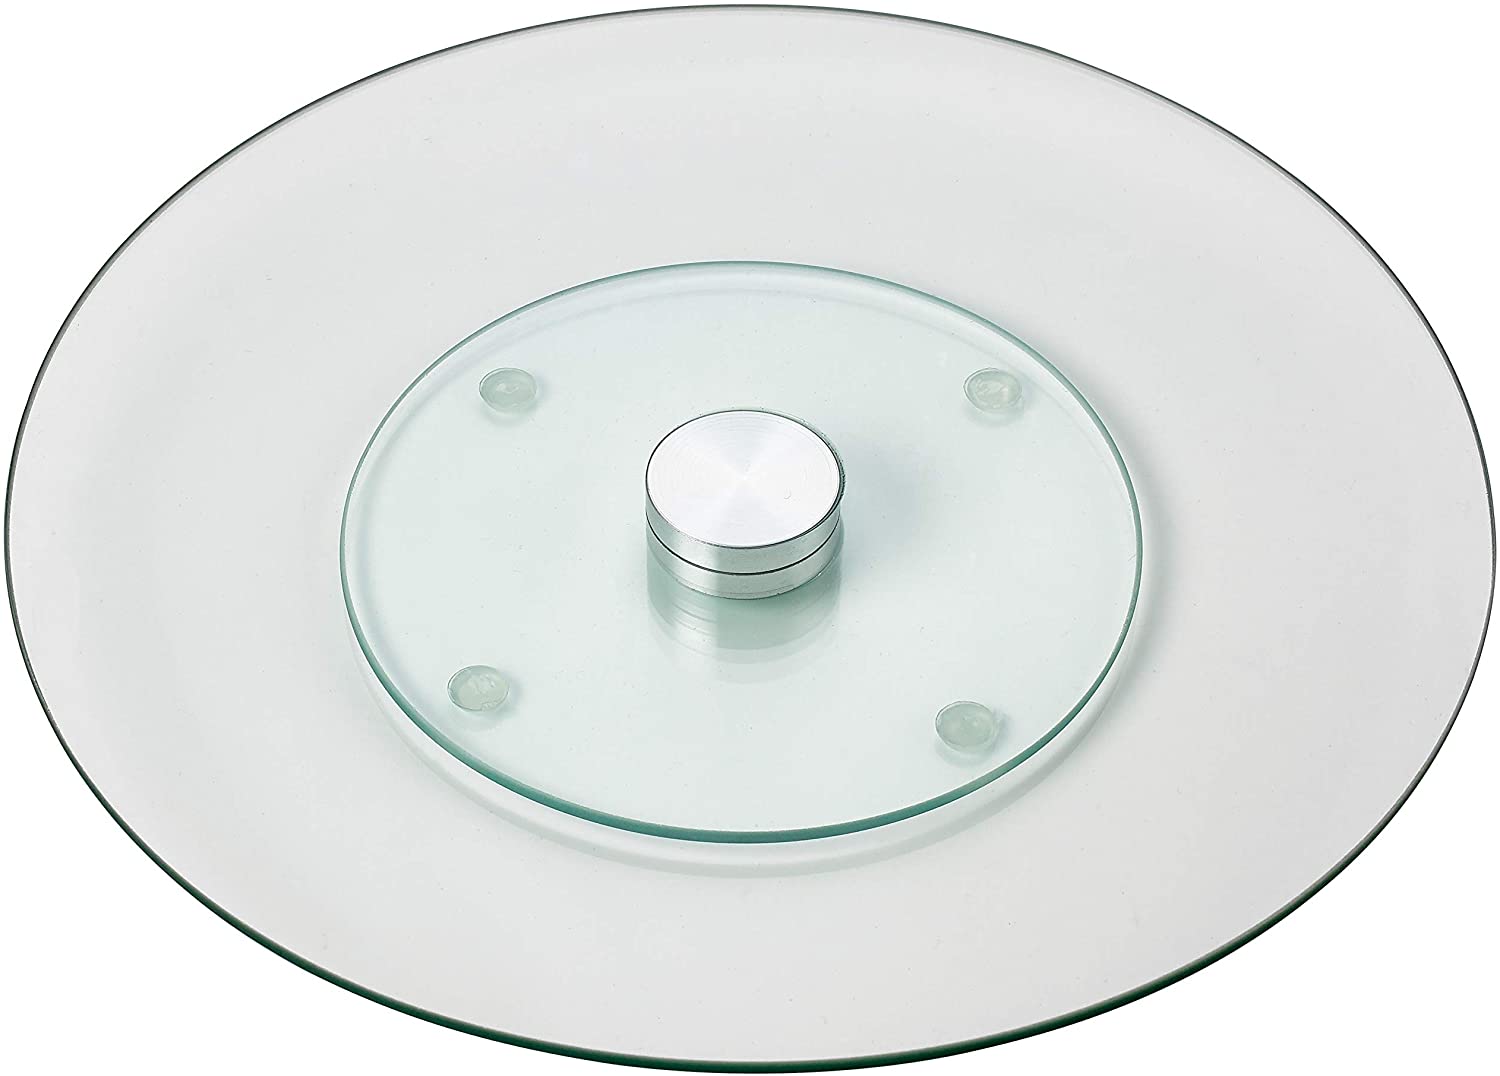 12 Inch Round Lazy Susan Turntable